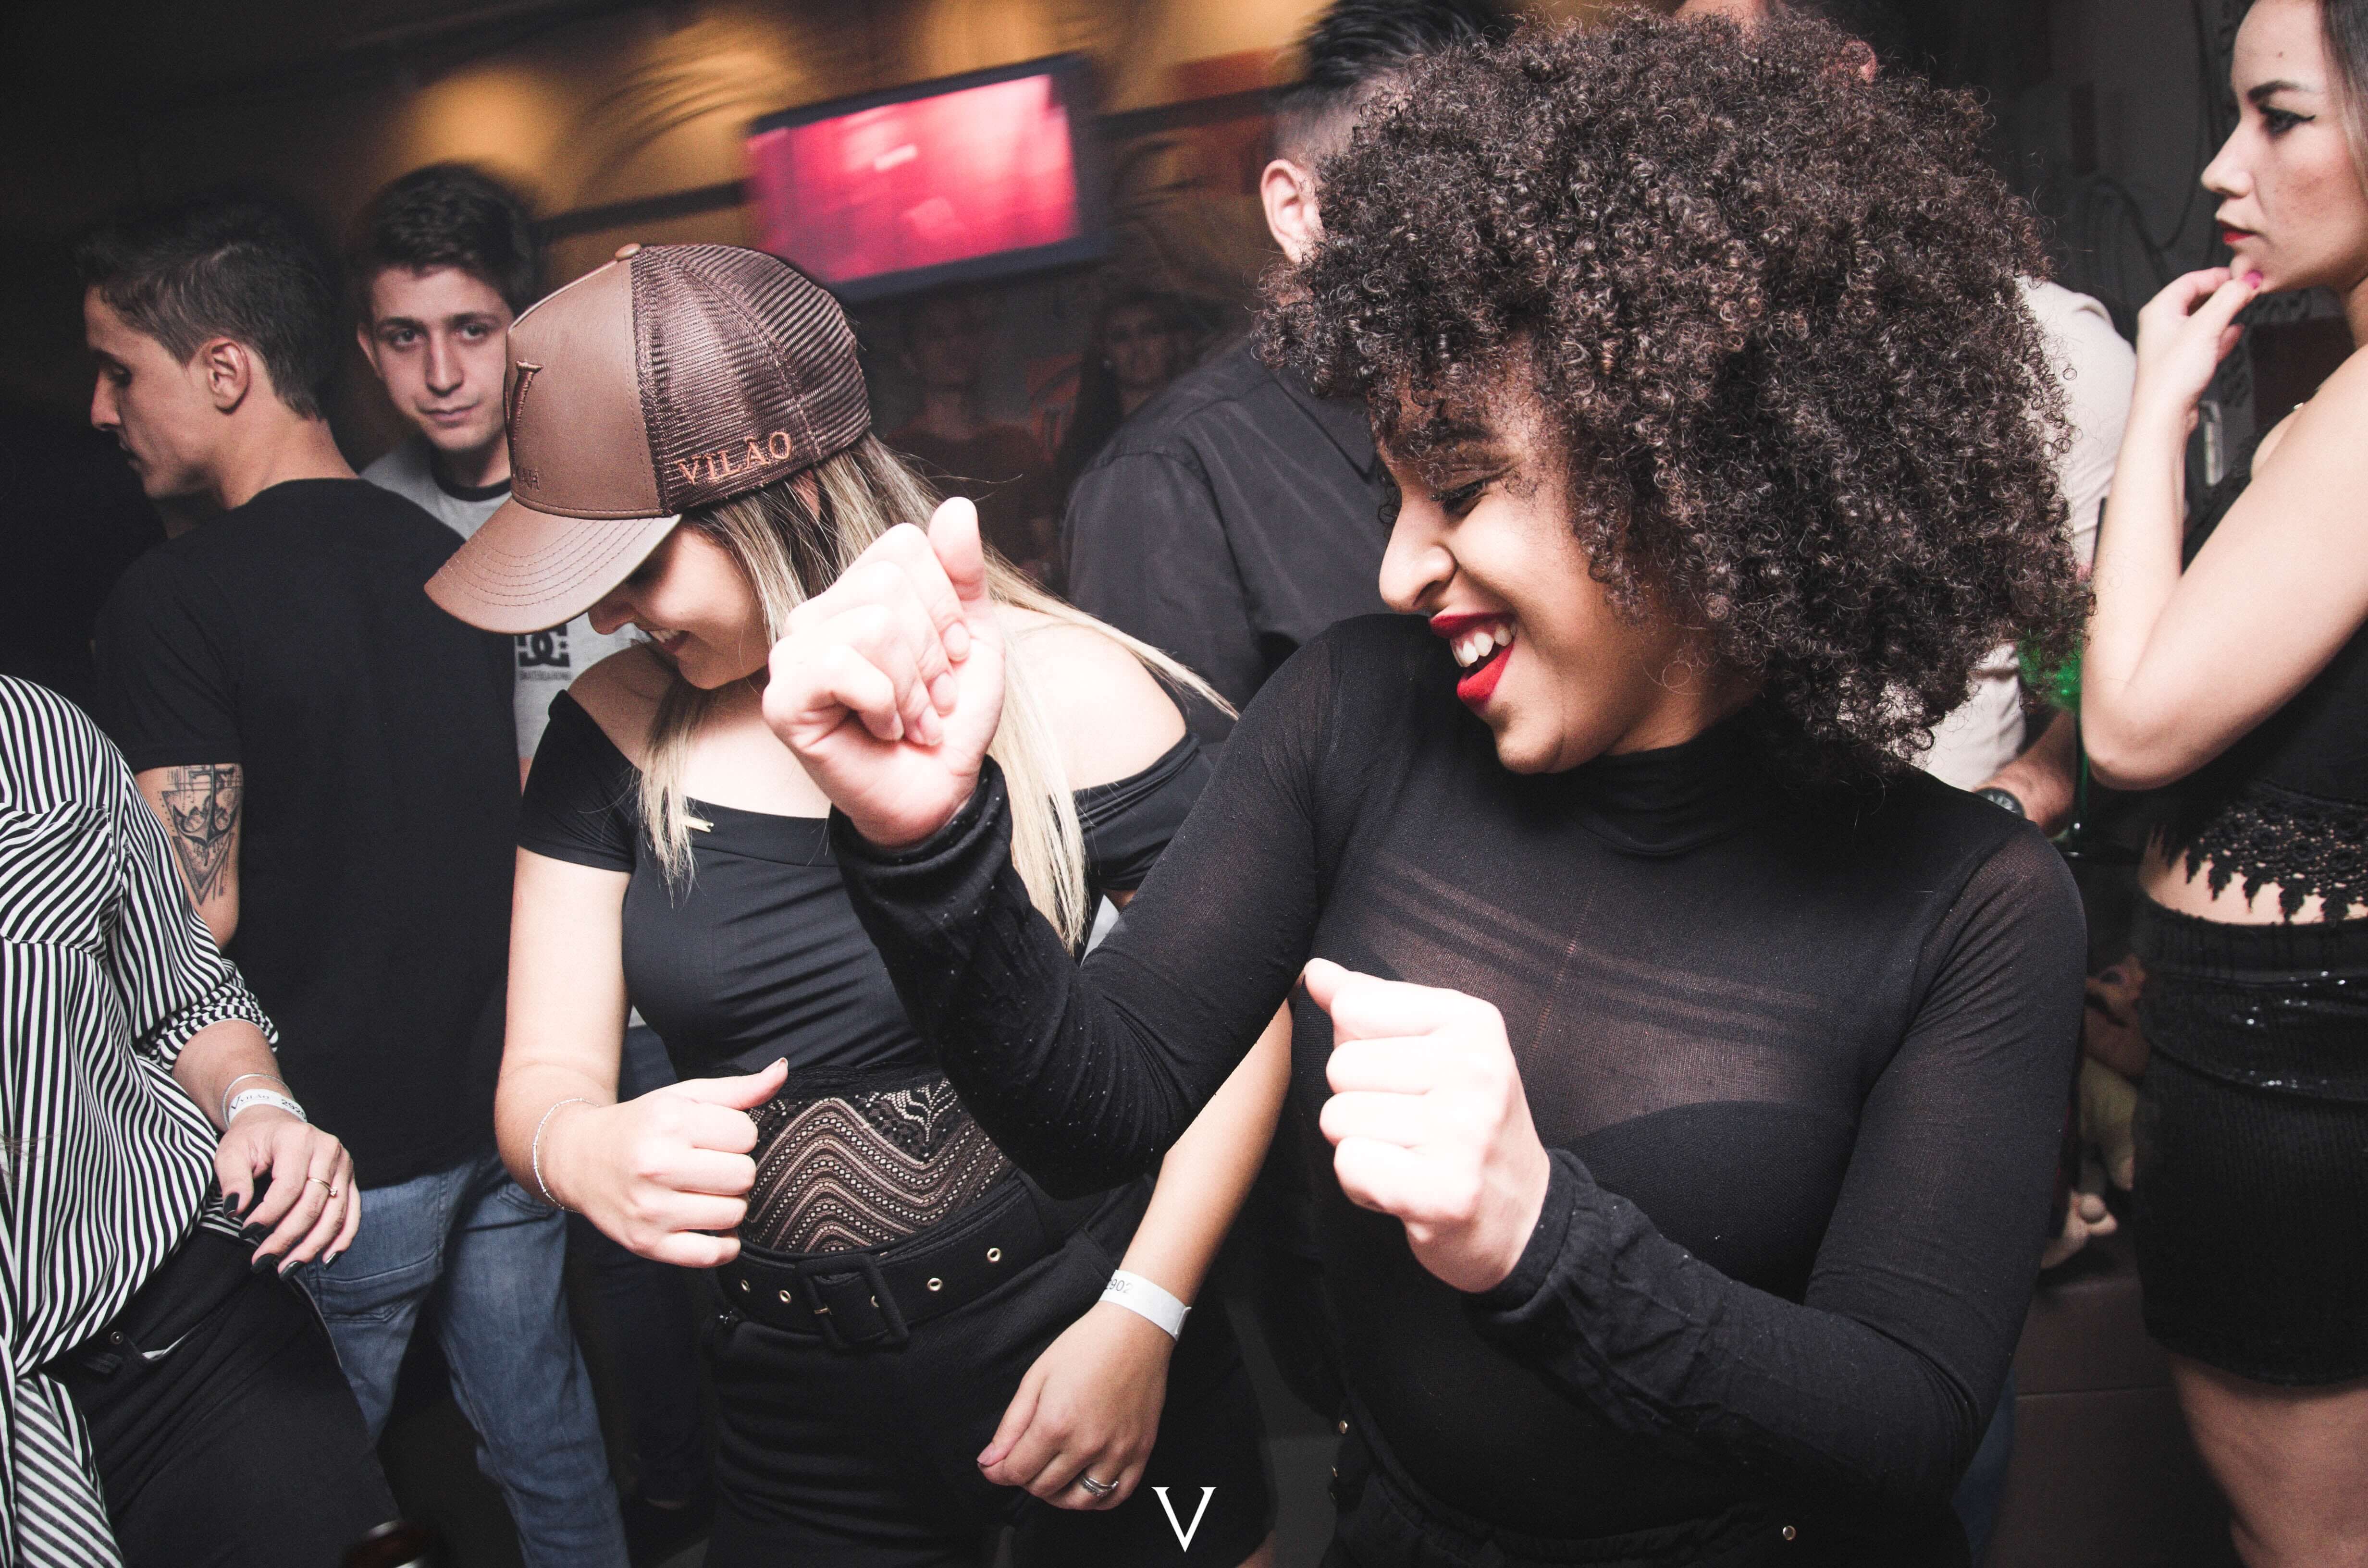 dancing at a club wearing tyvek wristbands.